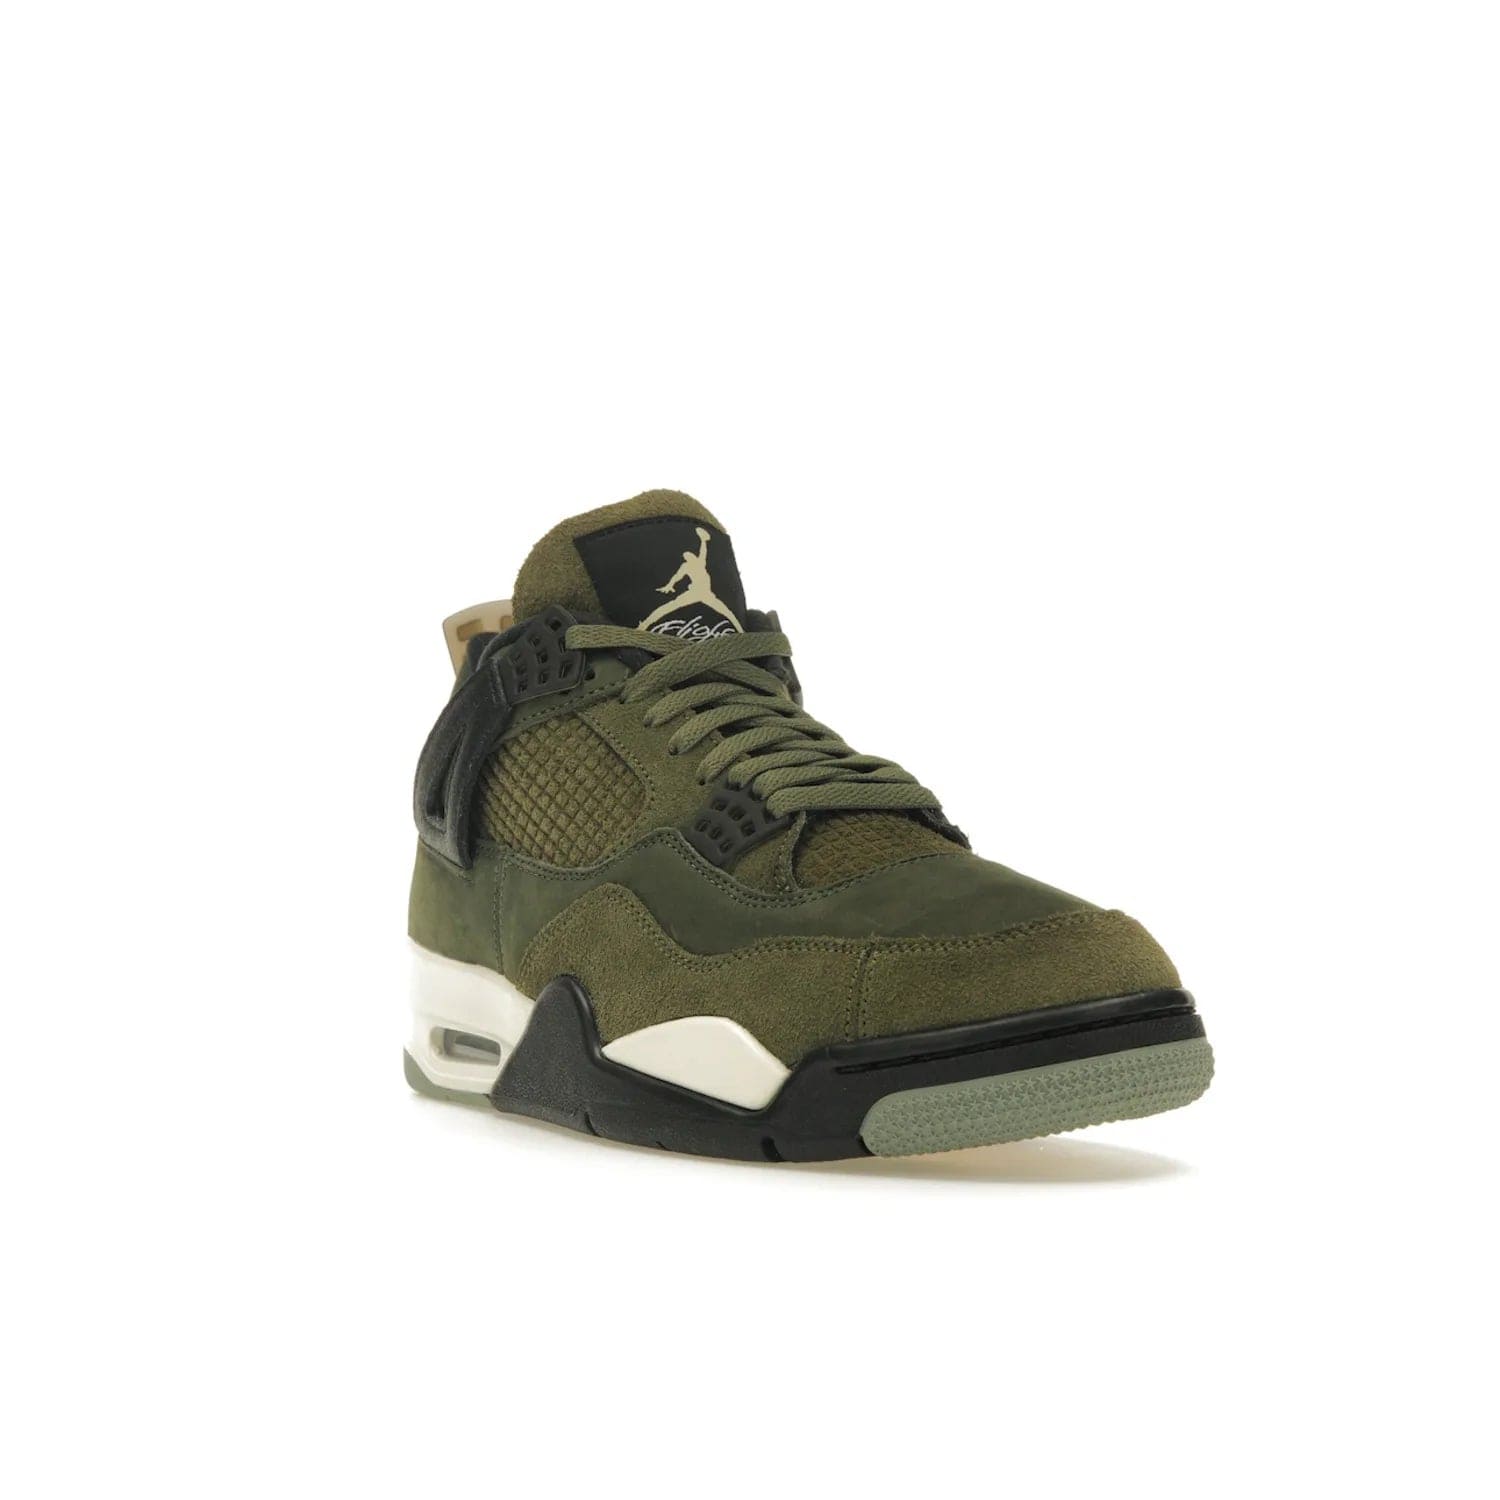 Jordan 4 Retro SE Craft Medium Olive - Image 7 - Only at www.BallersClubKickz.com - Grab the Jordan 4 Retro SE Crafts for a unique style. Combines Medium Olive, Pale Vanilla, Khaki, Black and Sail, with same classic shape, cushioning, and rubber outsole. Available on November 18th!